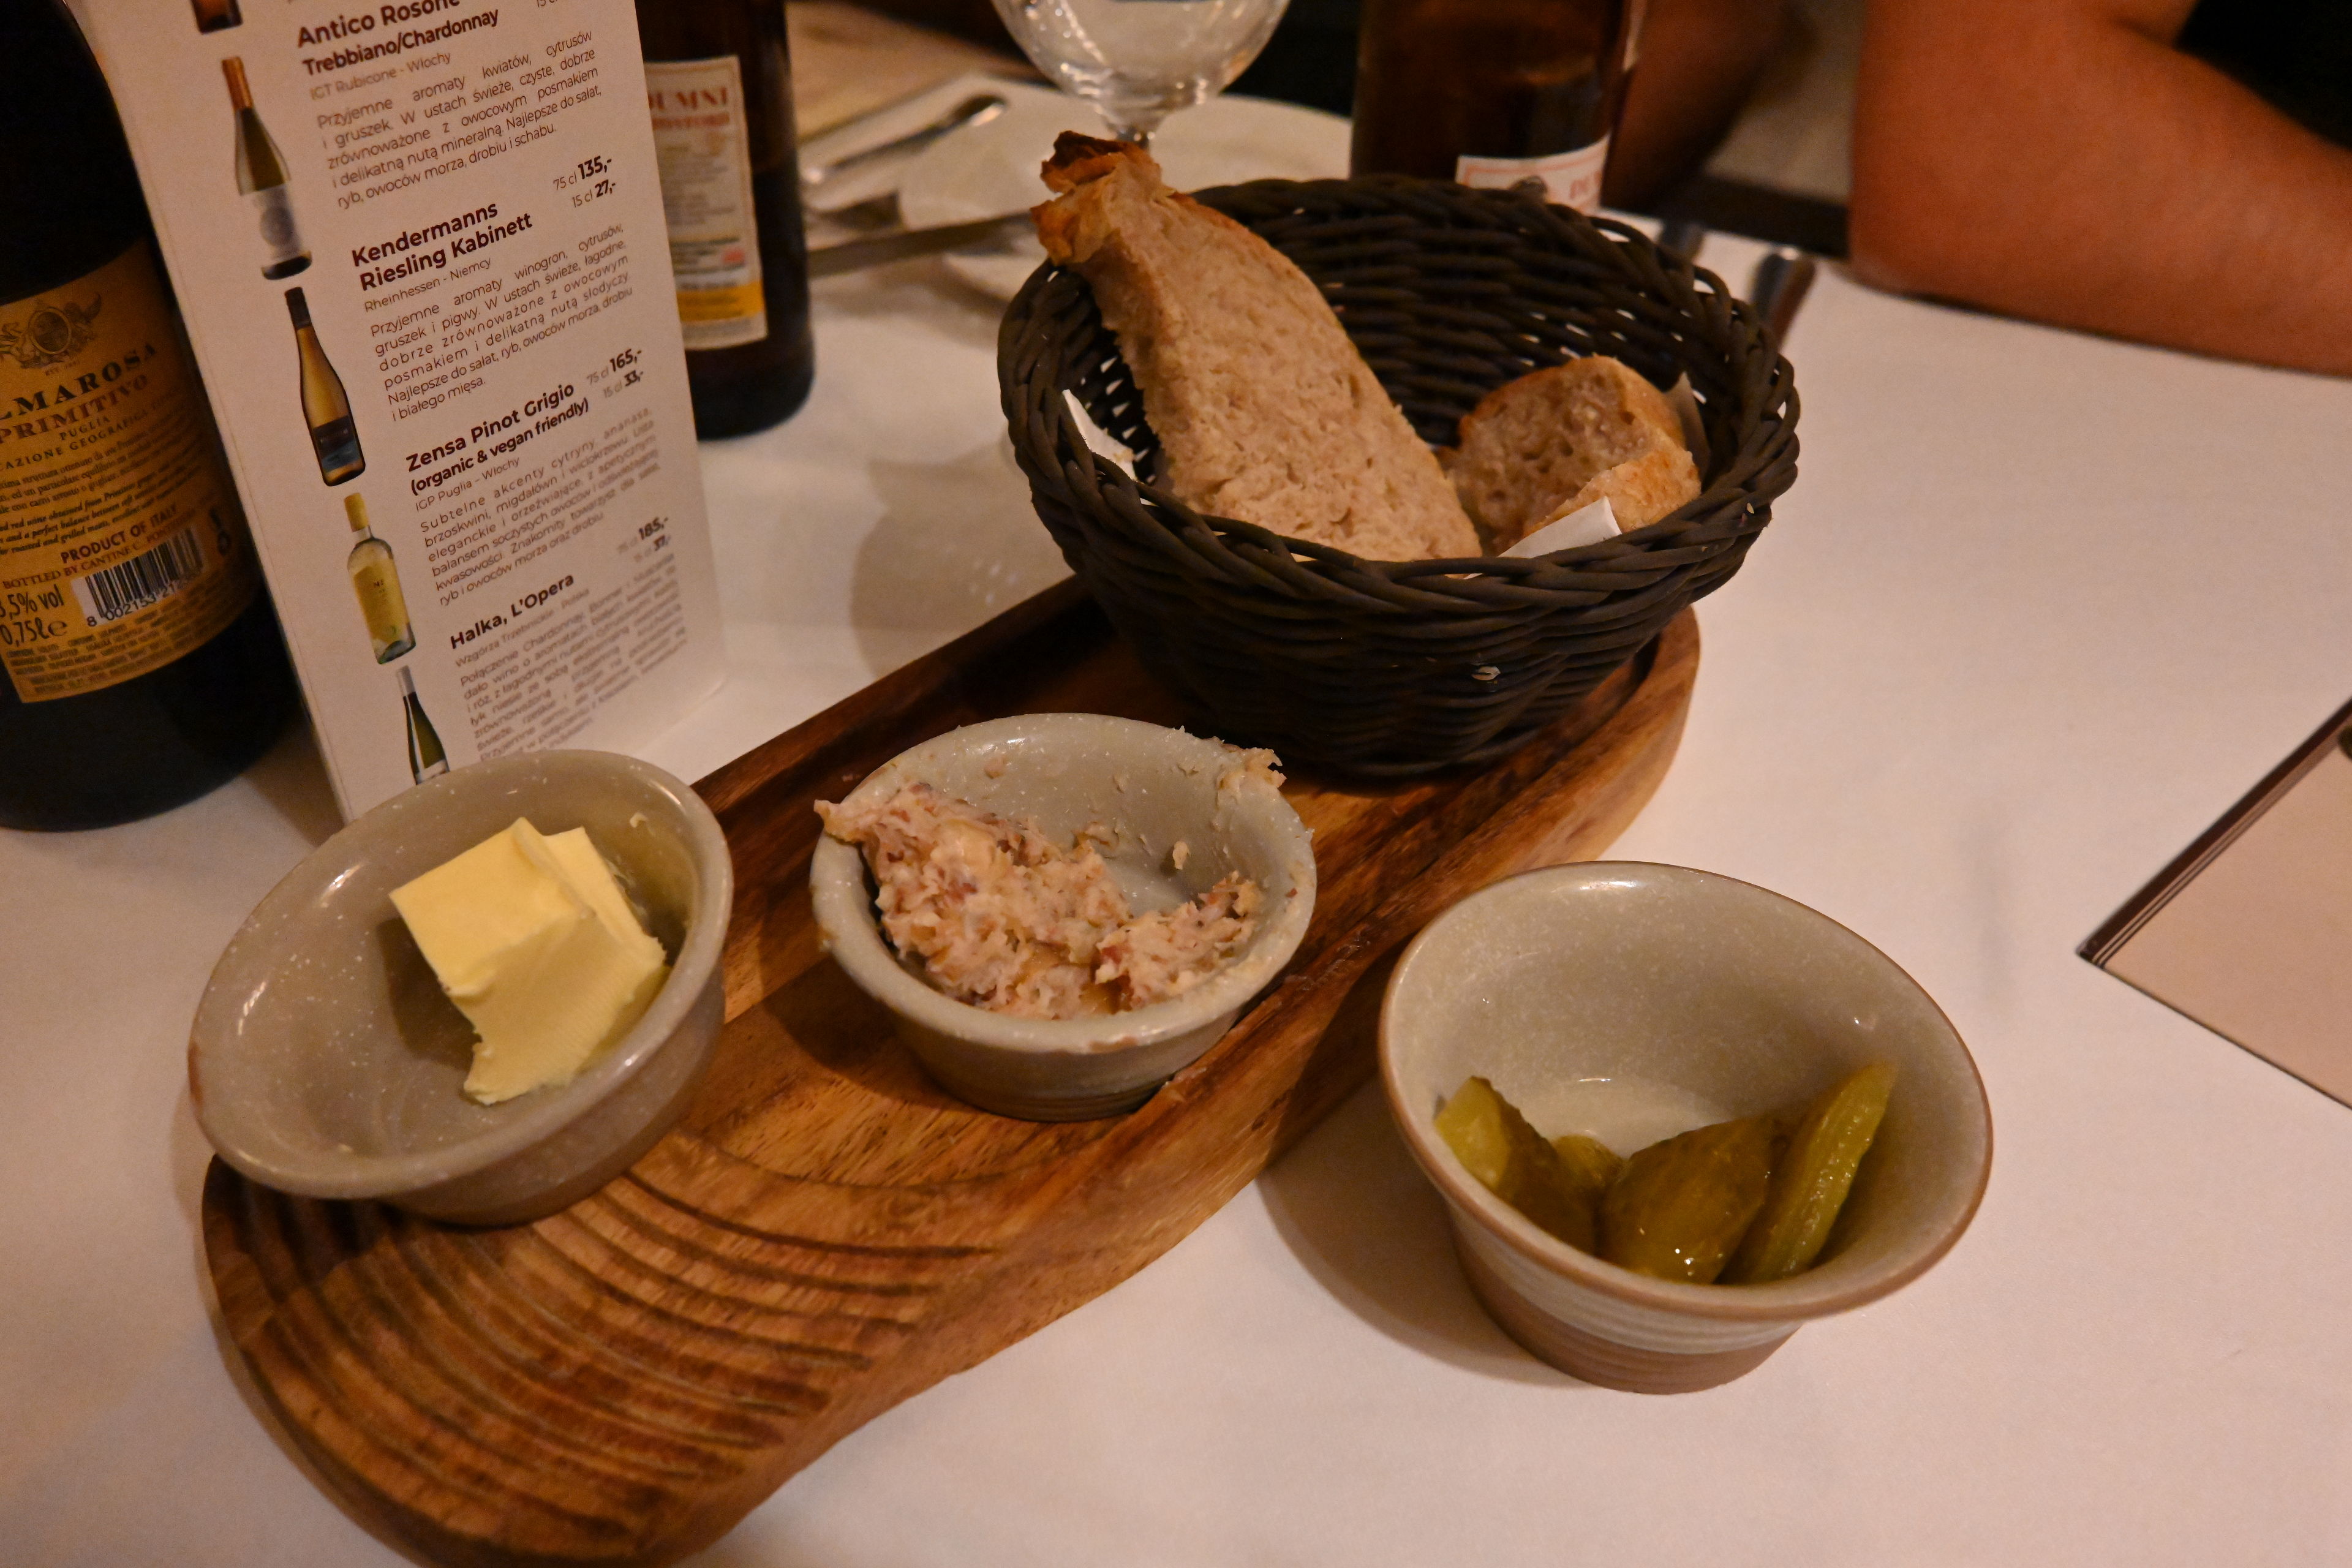 Thursday we took our new team out for dinner at Stary Dom, a traditional Polish place. They serve bread not just with butter but also with a pork fat mixture, and with pickles!